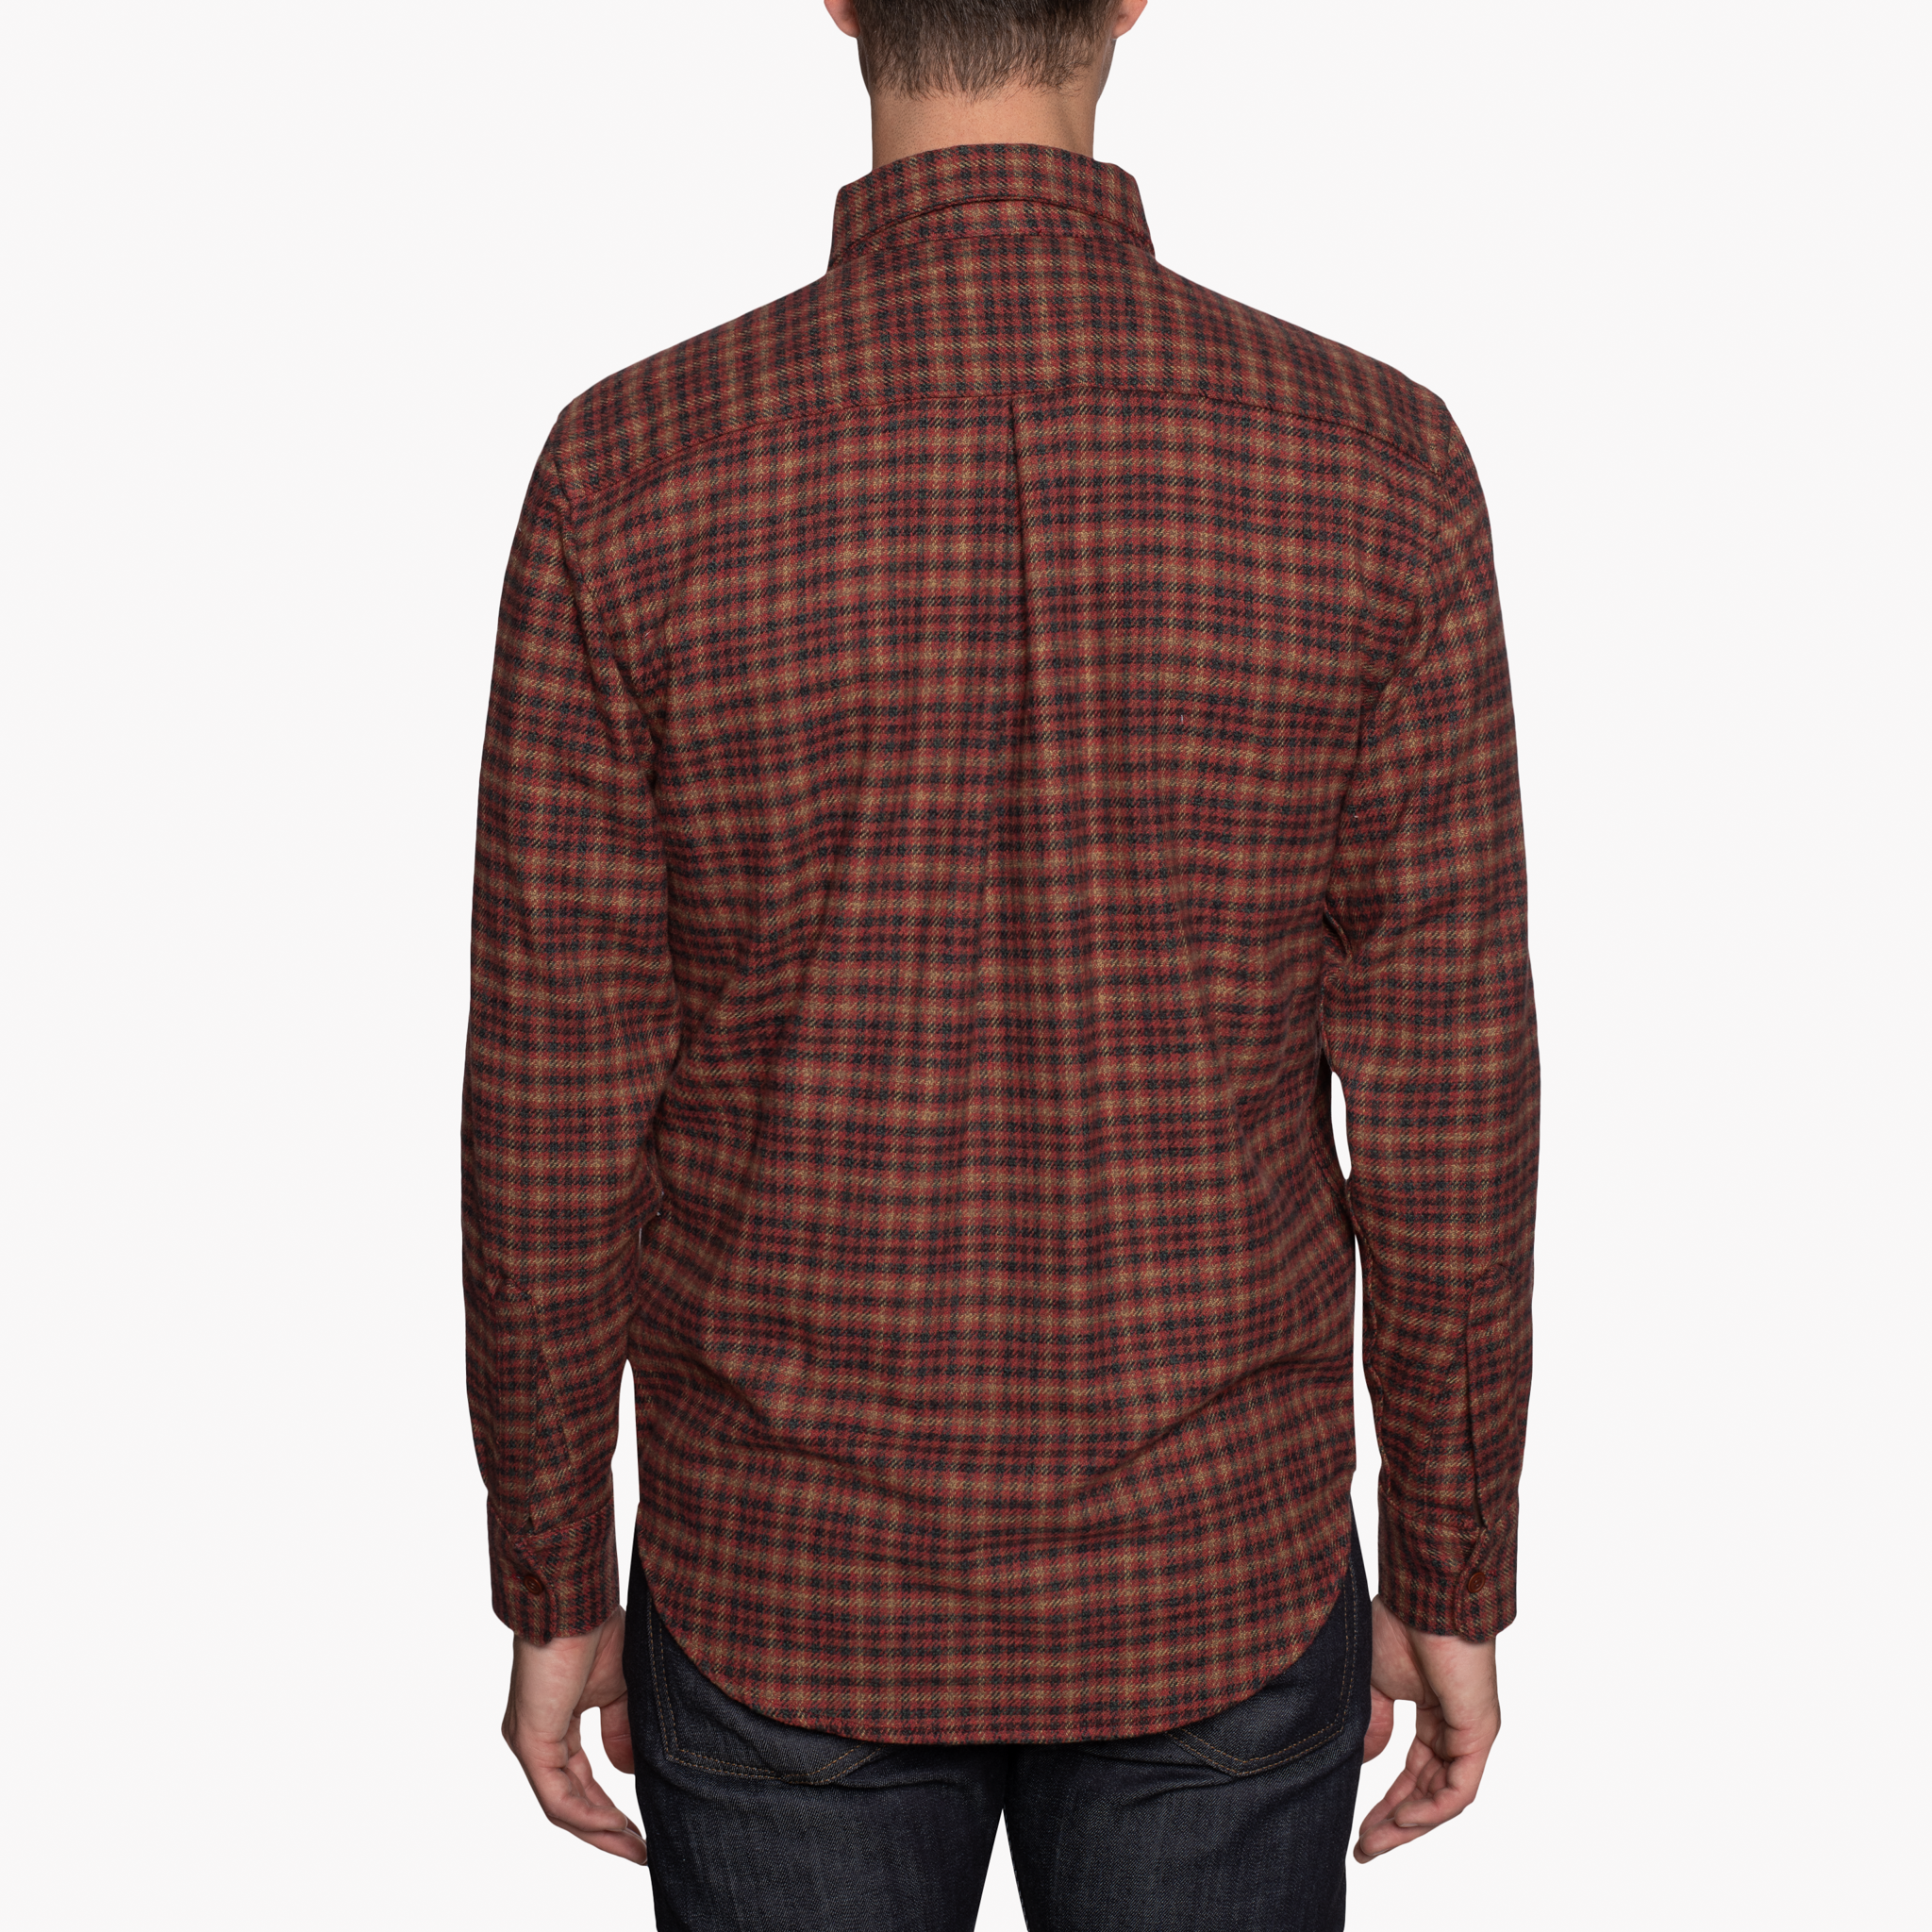  Easy Shirt - Heavy Vintage Flannel - Red - back 